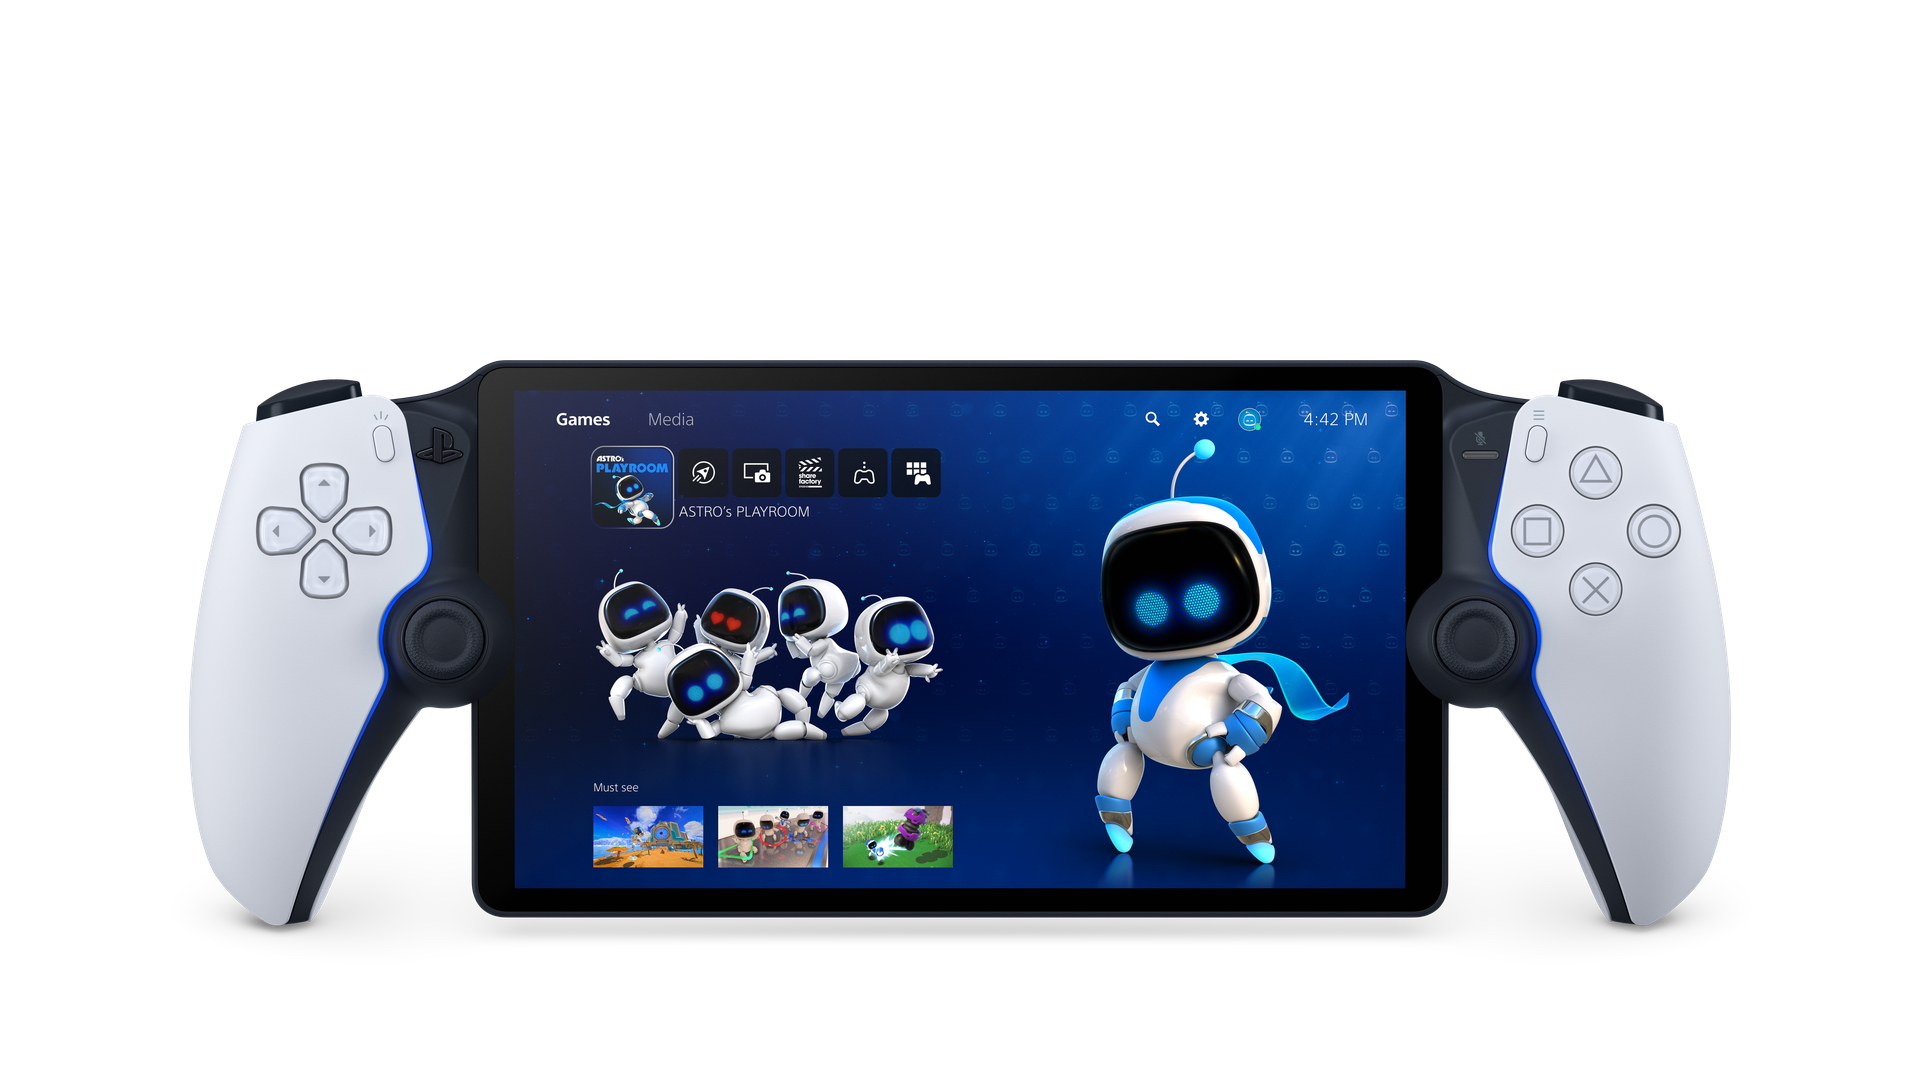 Review: Sony's PlayStation Portal does one narrow thing, but does it well